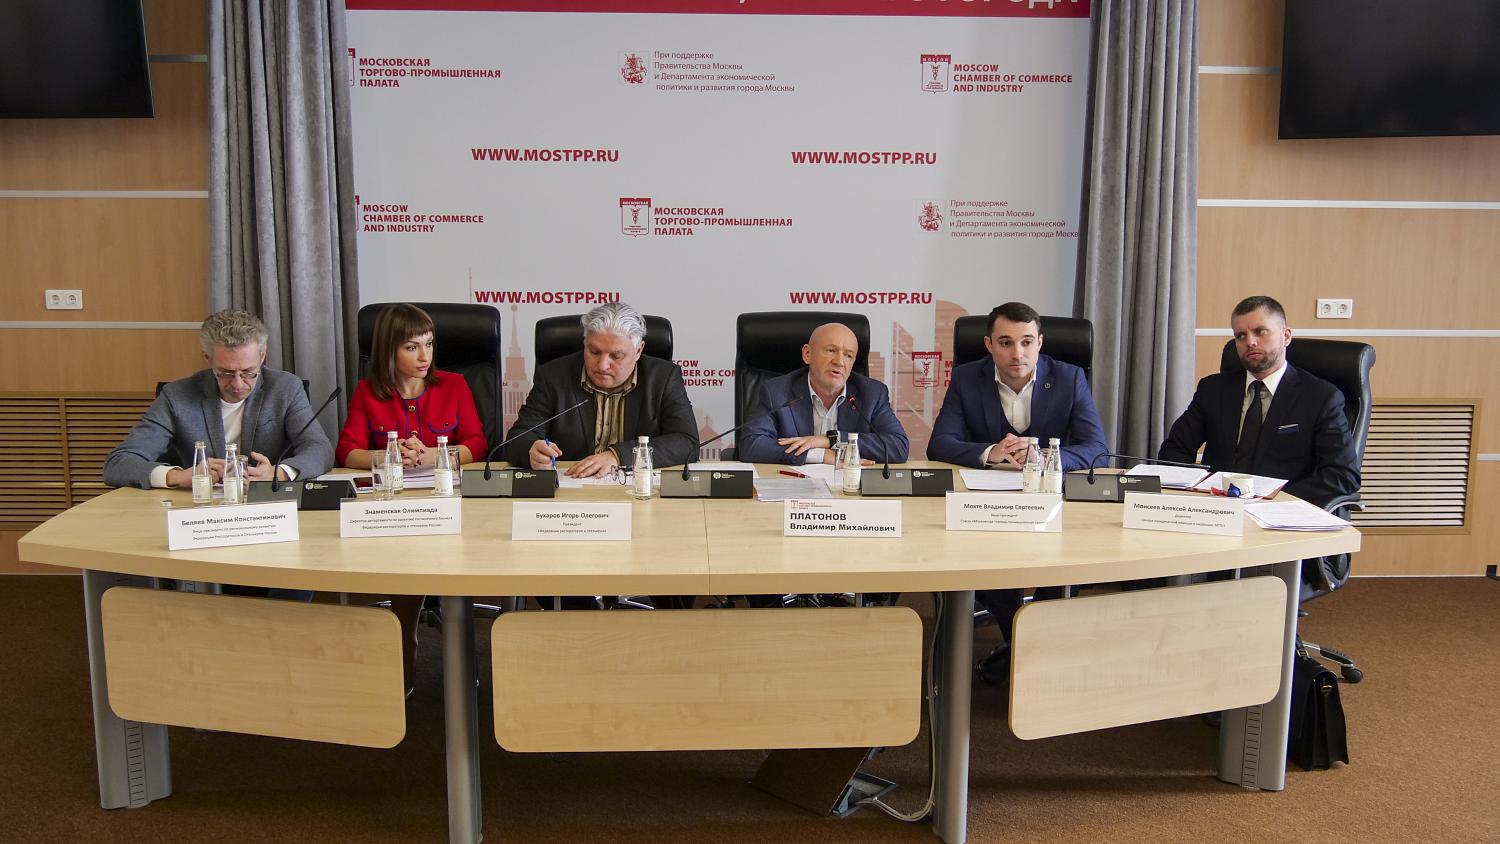 Restaurateurs and hoteliers discussed the situation in the industry in connection with the coronavirus pandemic